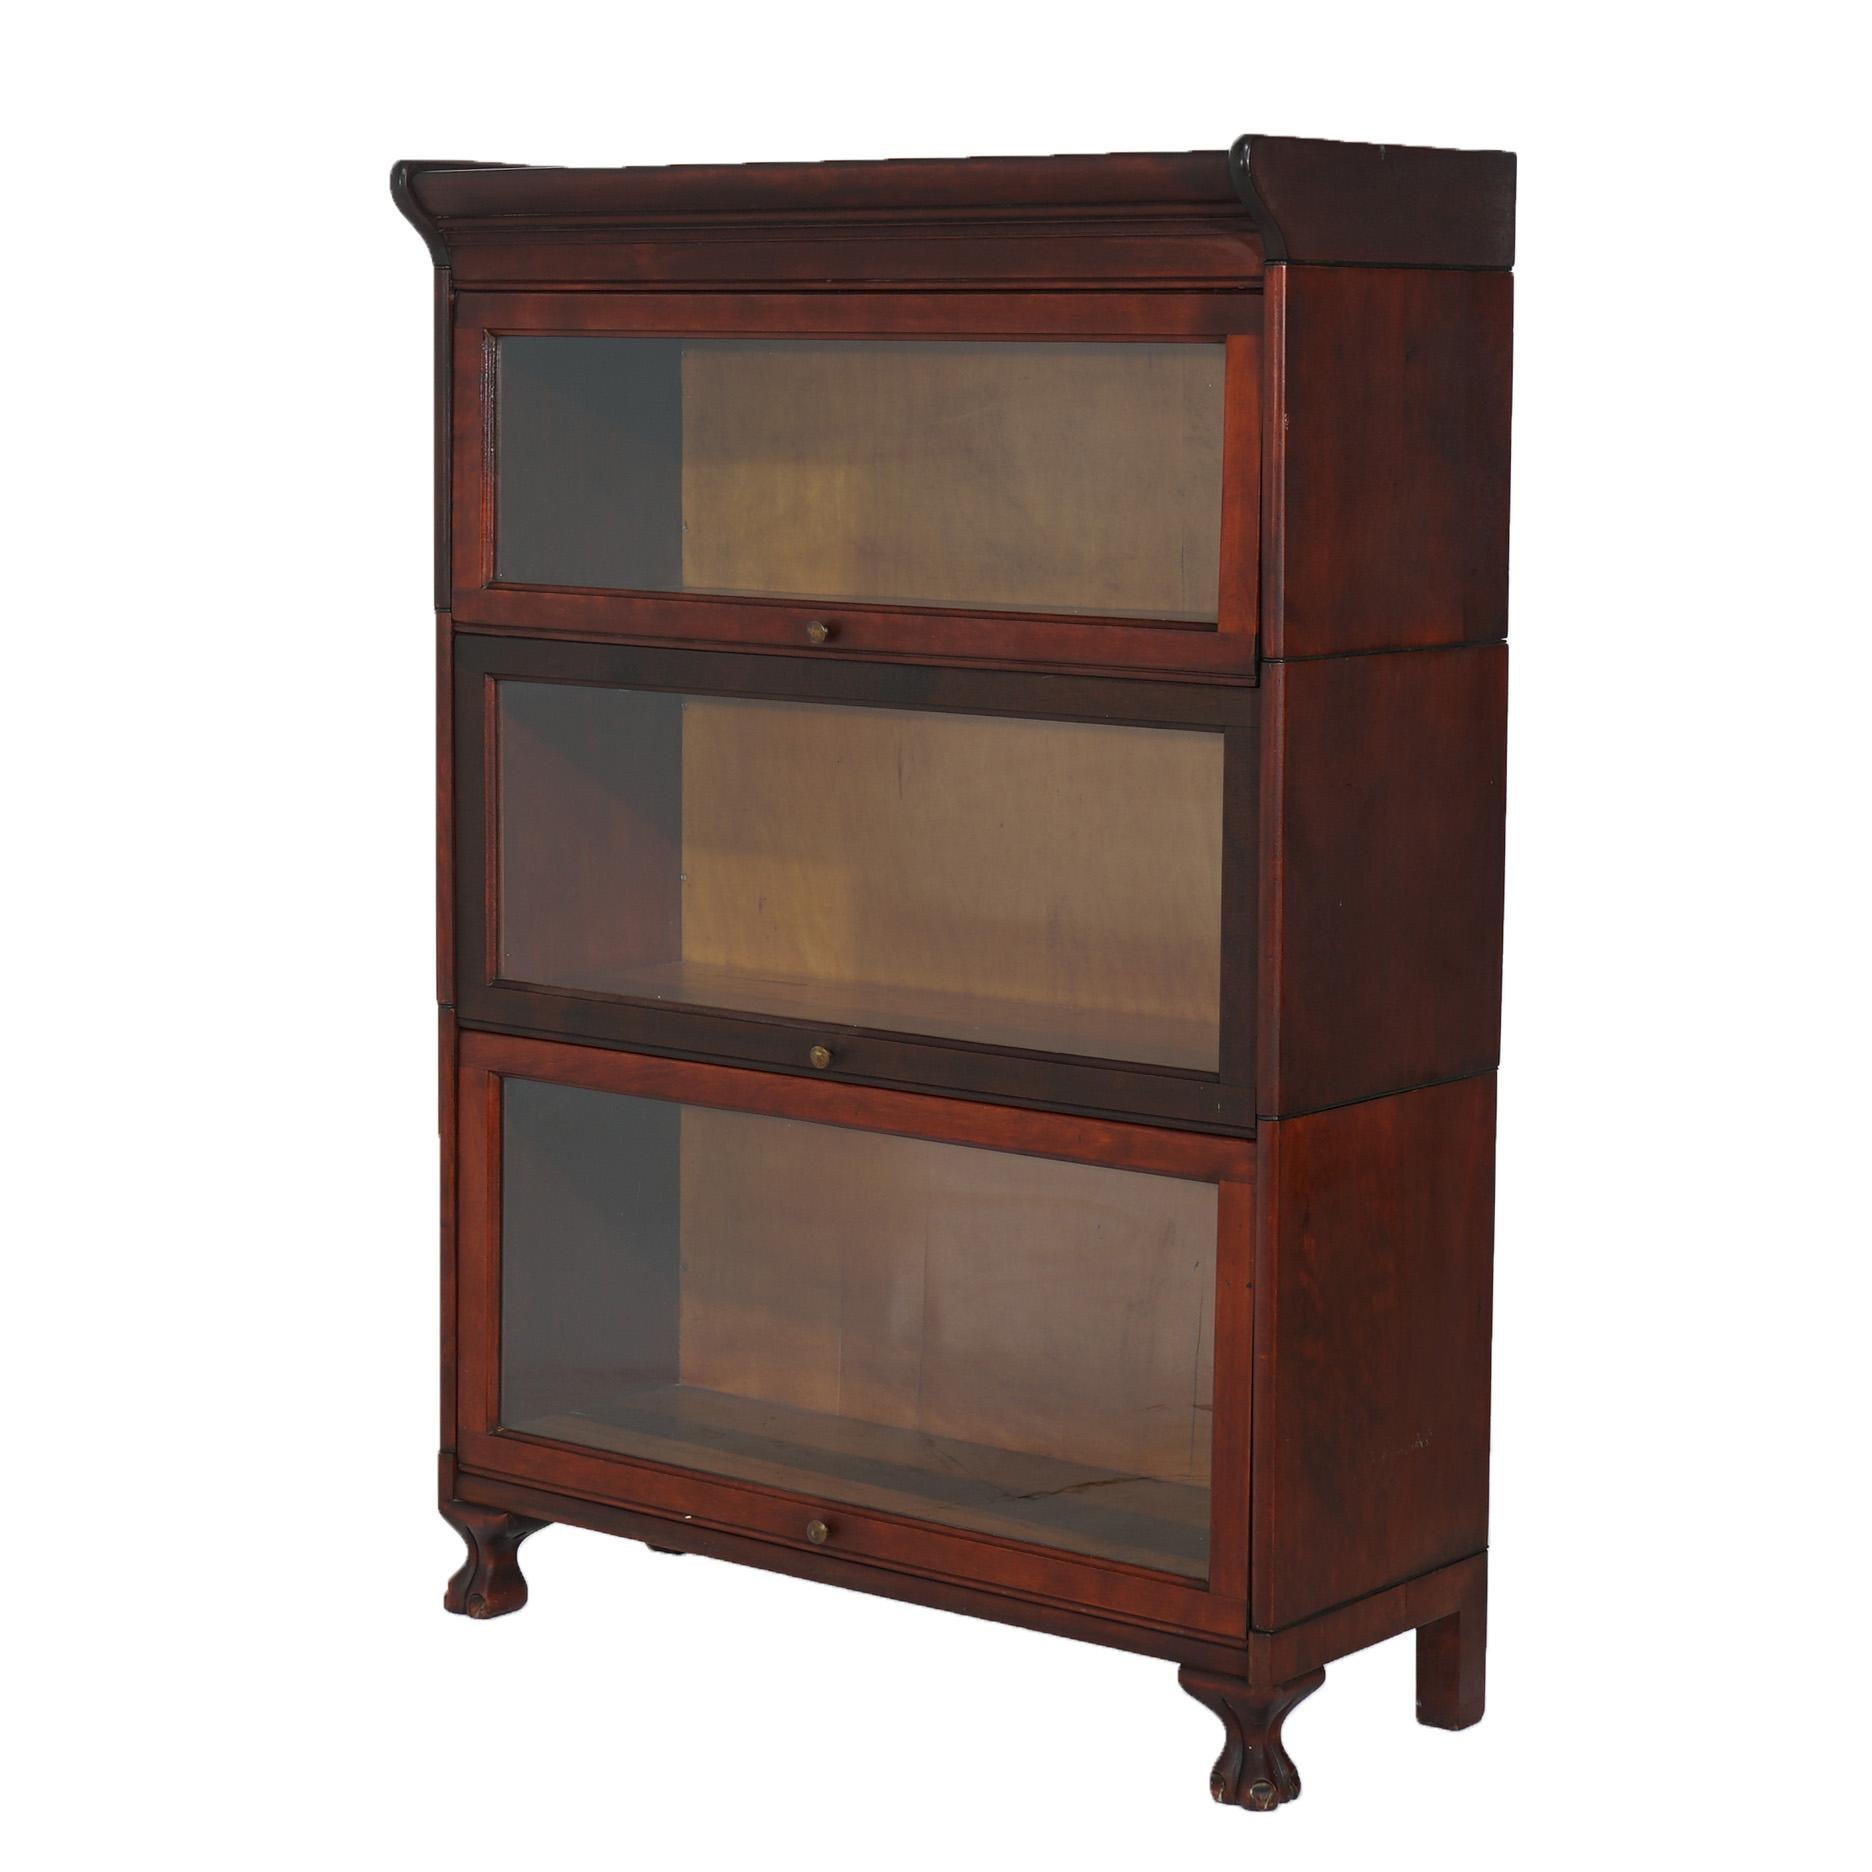 ***Ask About Discounted In-House Shipping***
An antique Arts and Crafts barrister bookcase attributed to Gunn offers mahogany construction with three stacks, each having a pull-out glass door and raised on stylized paw feet; maker label as